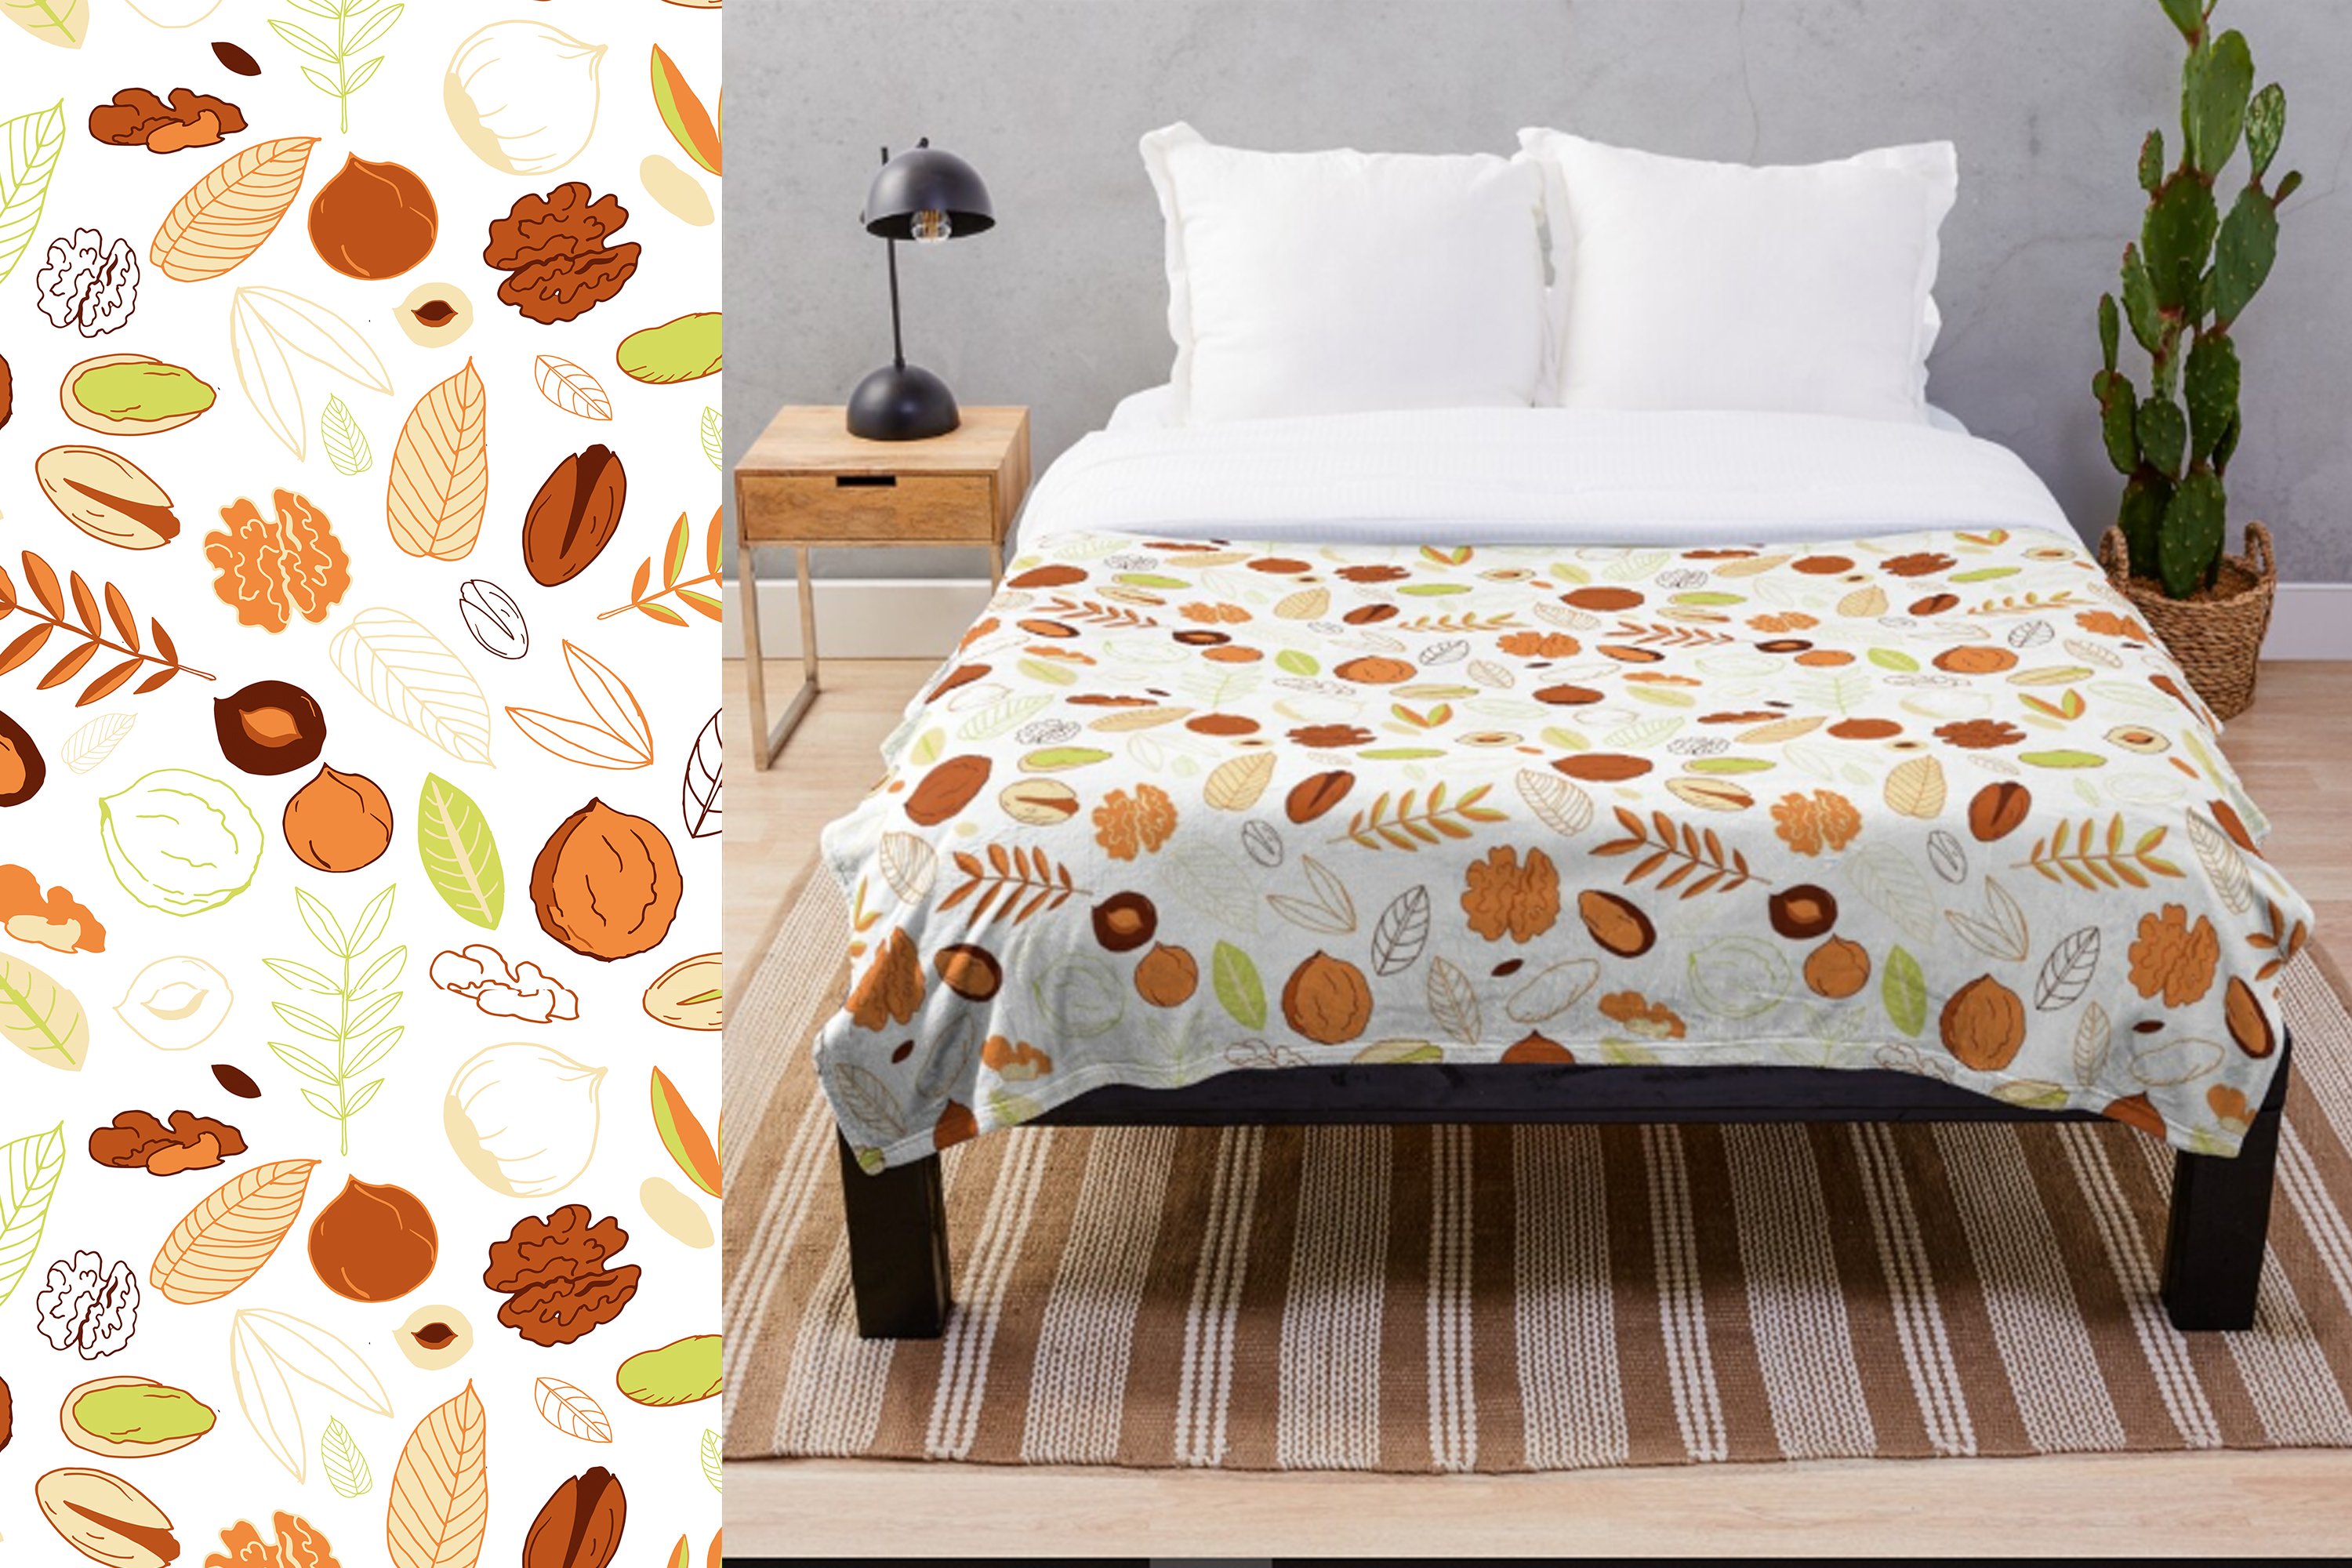 An example of bed clothes with nuts print.